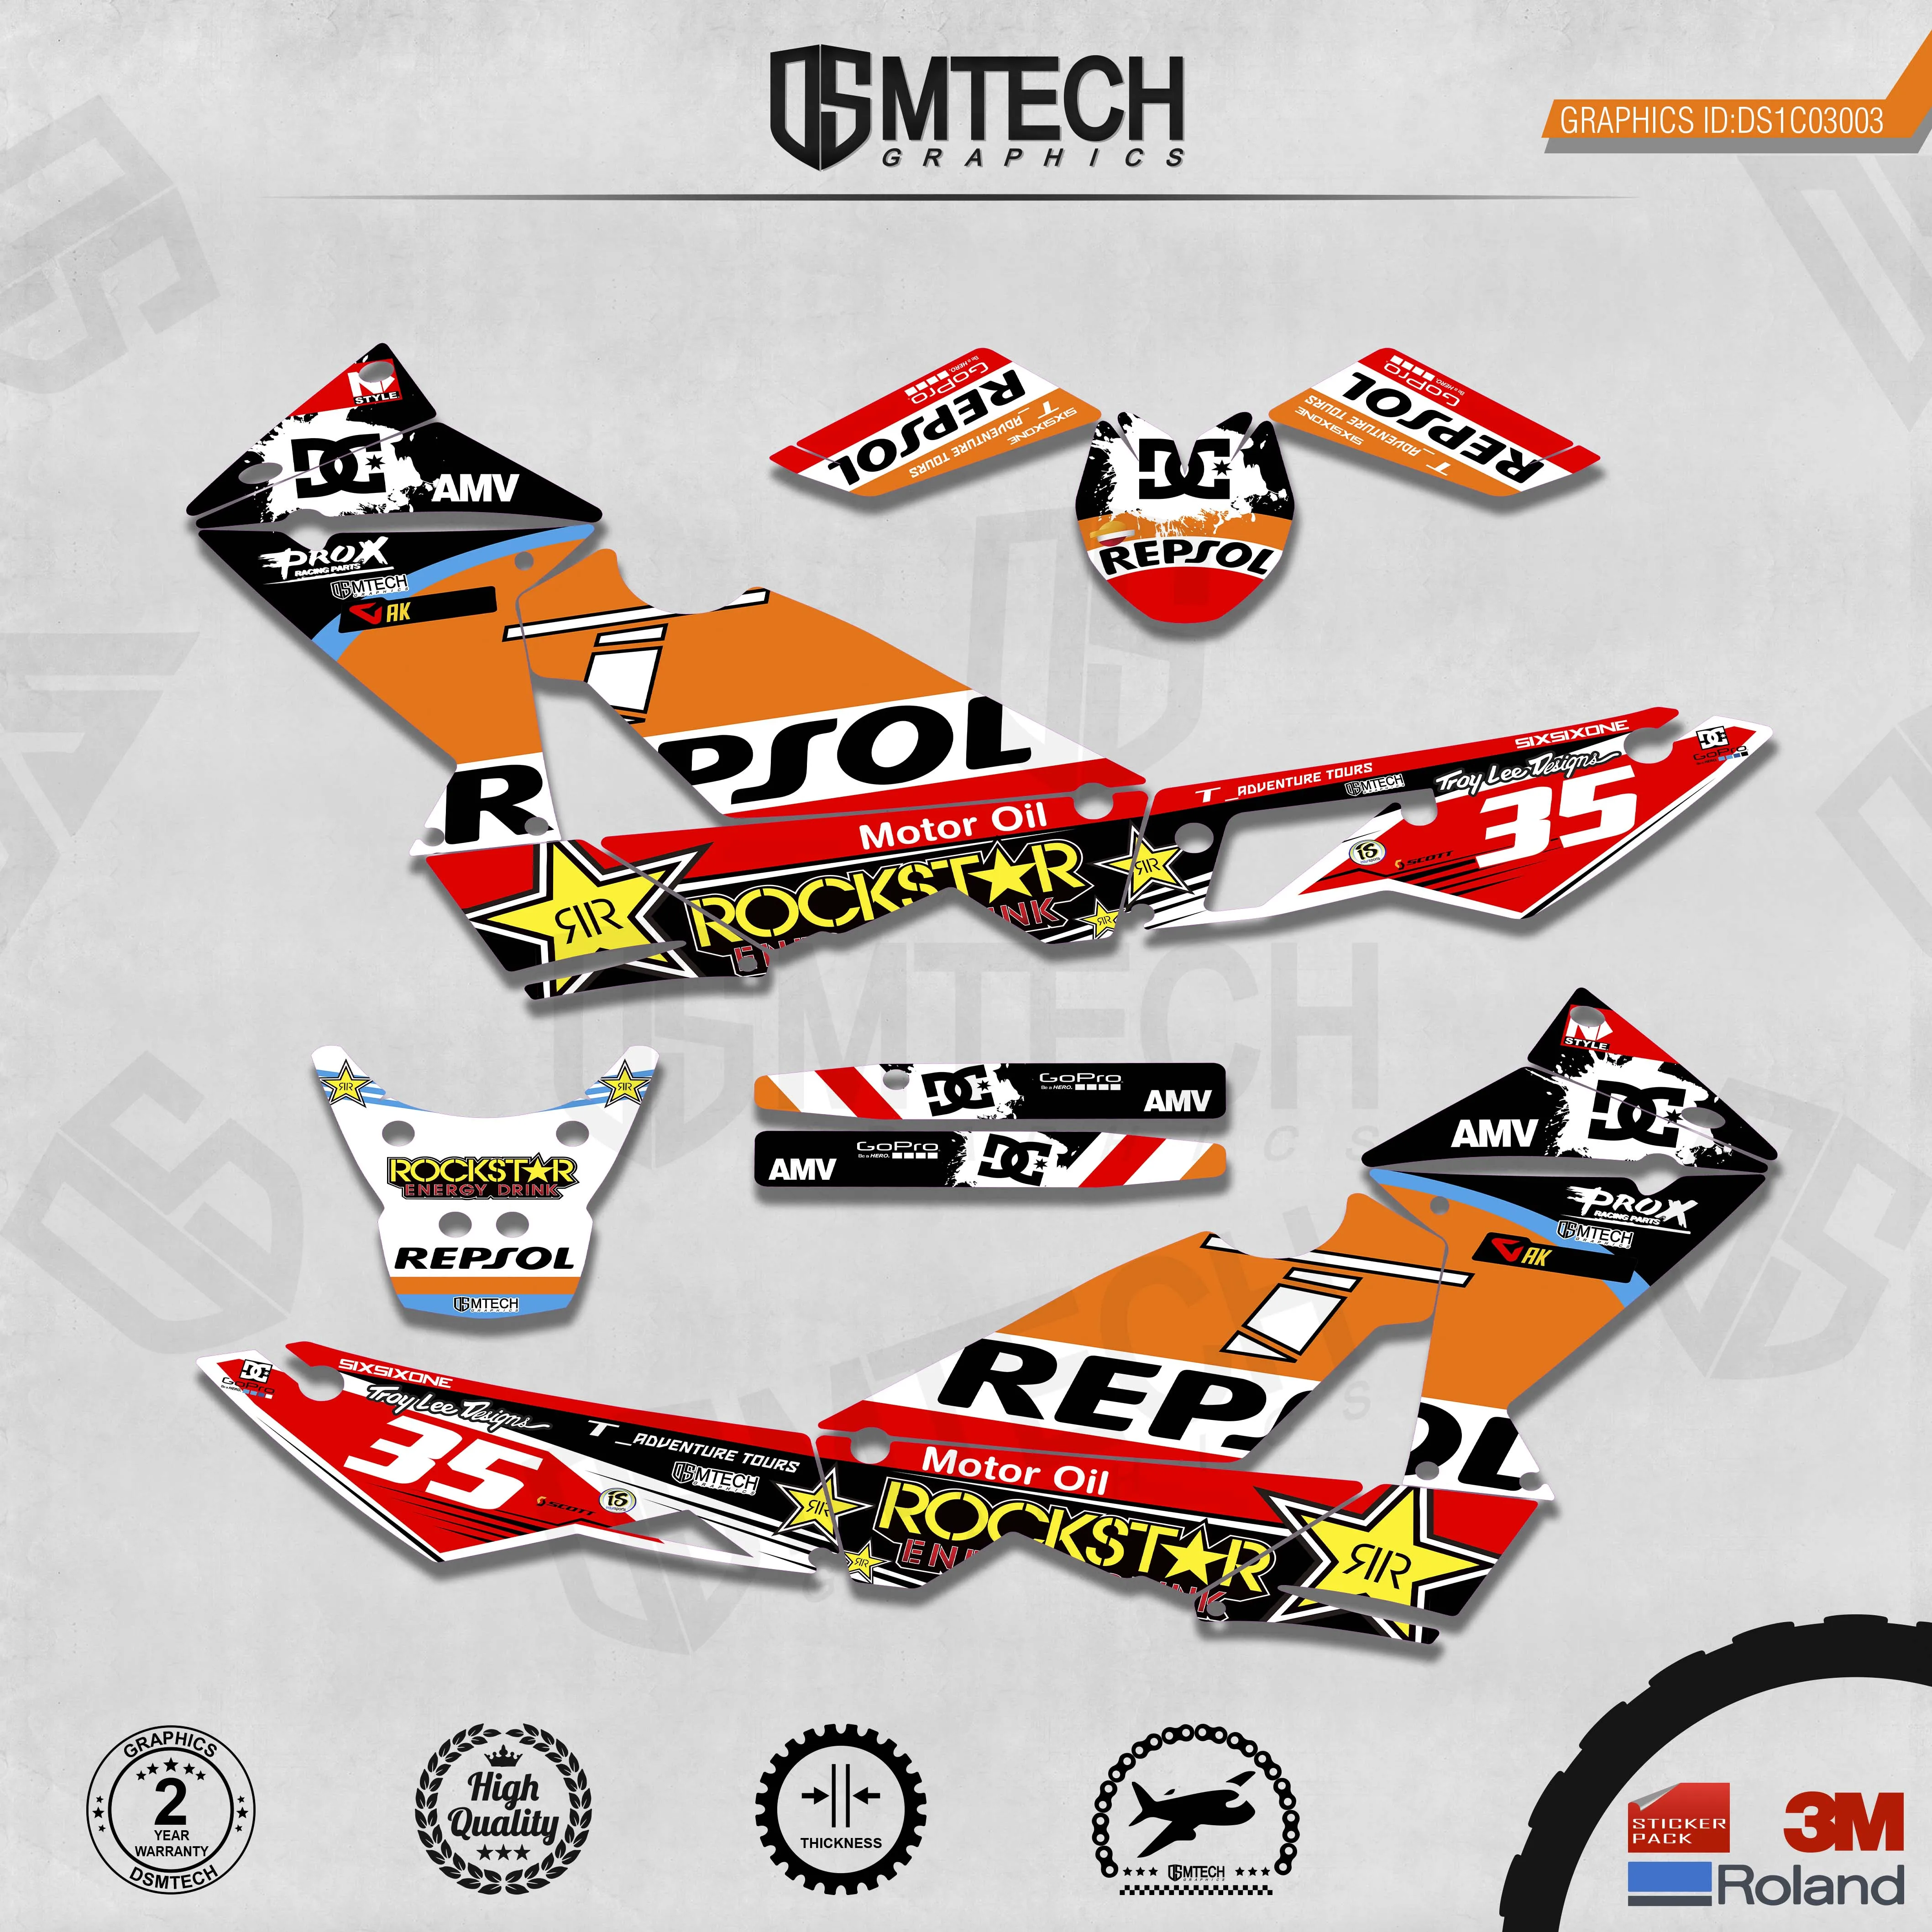 DSMTECH Customized Team Graphics Backgrounds Decals 3M Custom Stickers For 2003-2006 2007-2010 2011-2016 KTM 990ADV 003 коврики eva skyway toyota camry 2006 2011 г в 53х82 55х73 55х51 55х51 s01705031